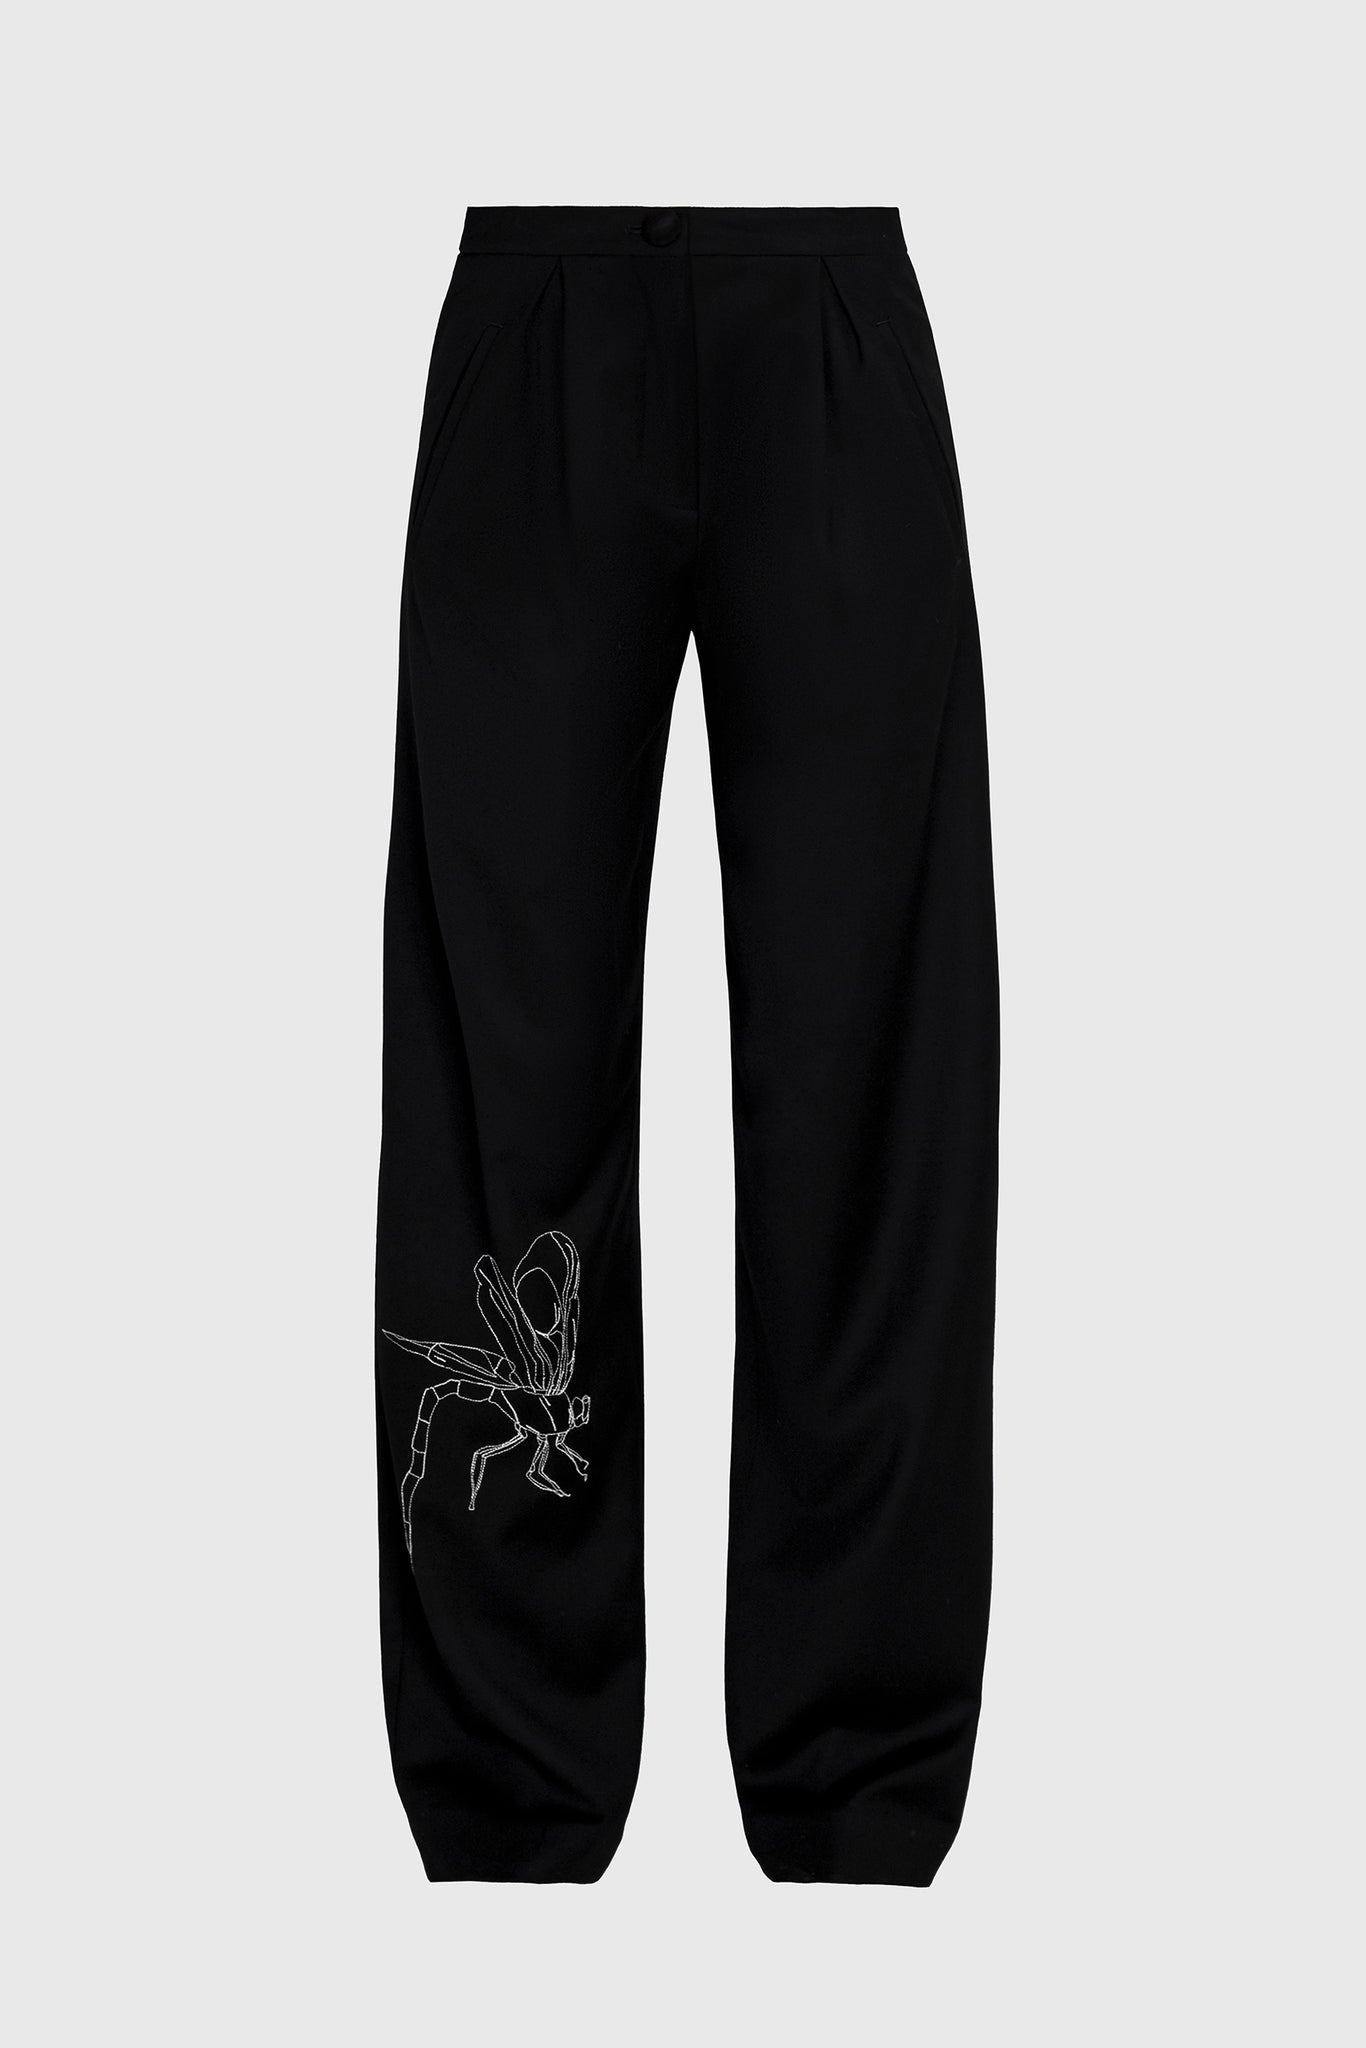 Gigi Hadid style trousers, tailored, high waist, great for tall women, great for medium height women, long trousers, white dragonfly embroidered on right leg, spirit animal, Asian style with European details, comfortable and warm wool, Italian luxury textile, black and white, minimal and striking, style with a short tailored jacket or a long T-shirt